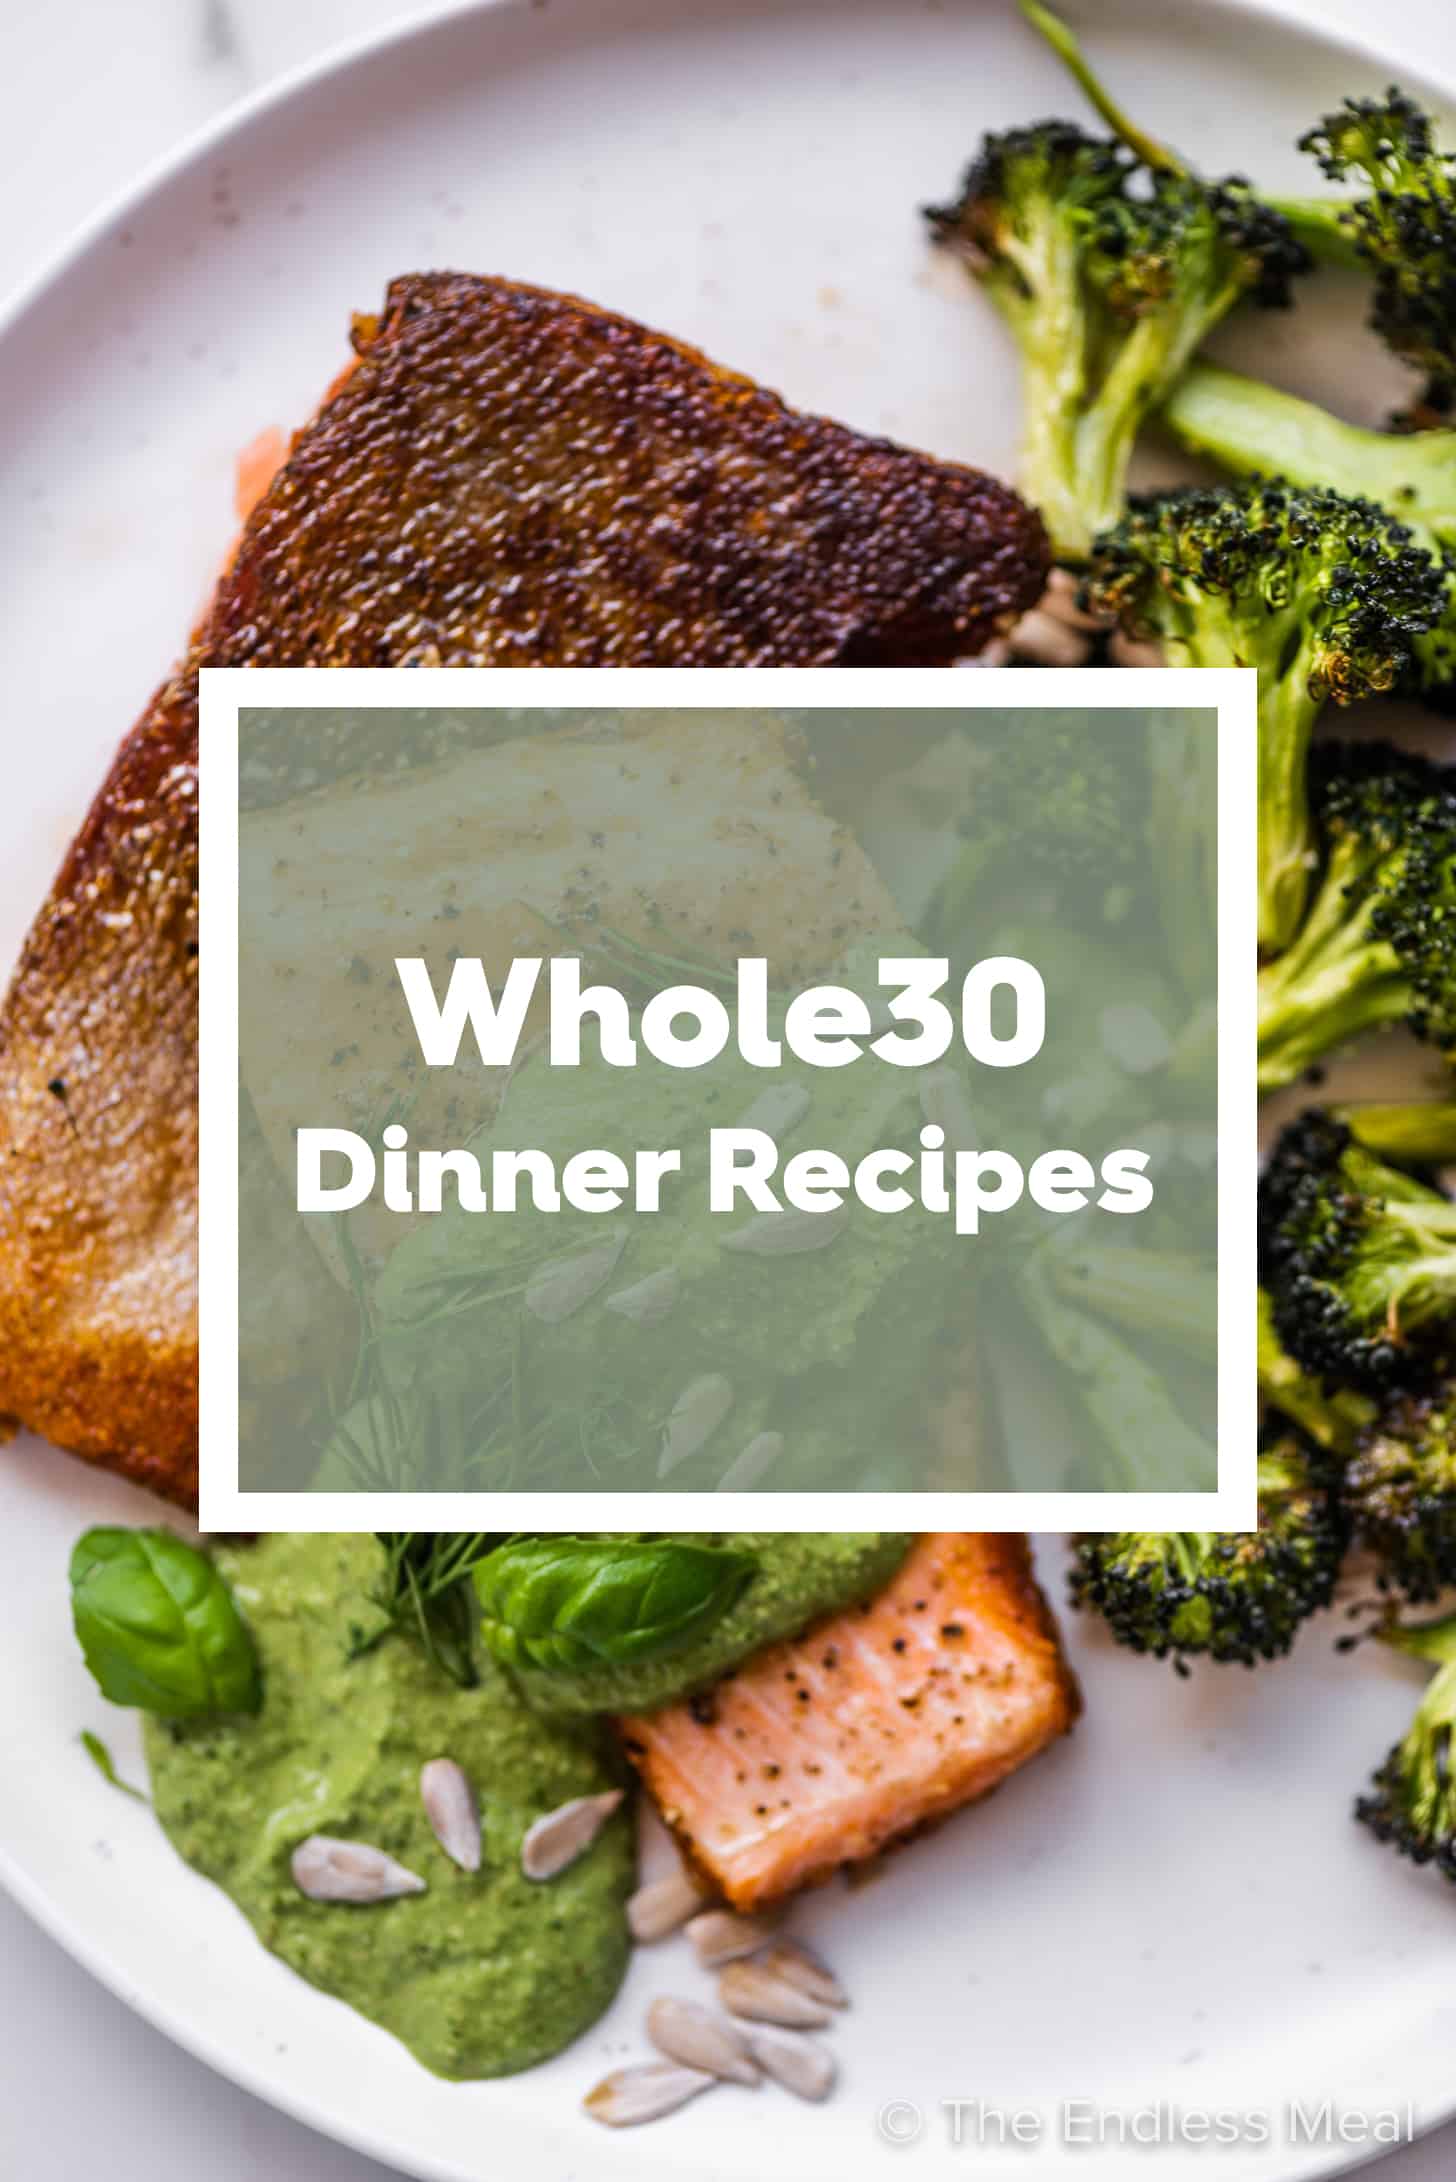 20 Satisfying Whole30 Snacks You Can Make or Buy